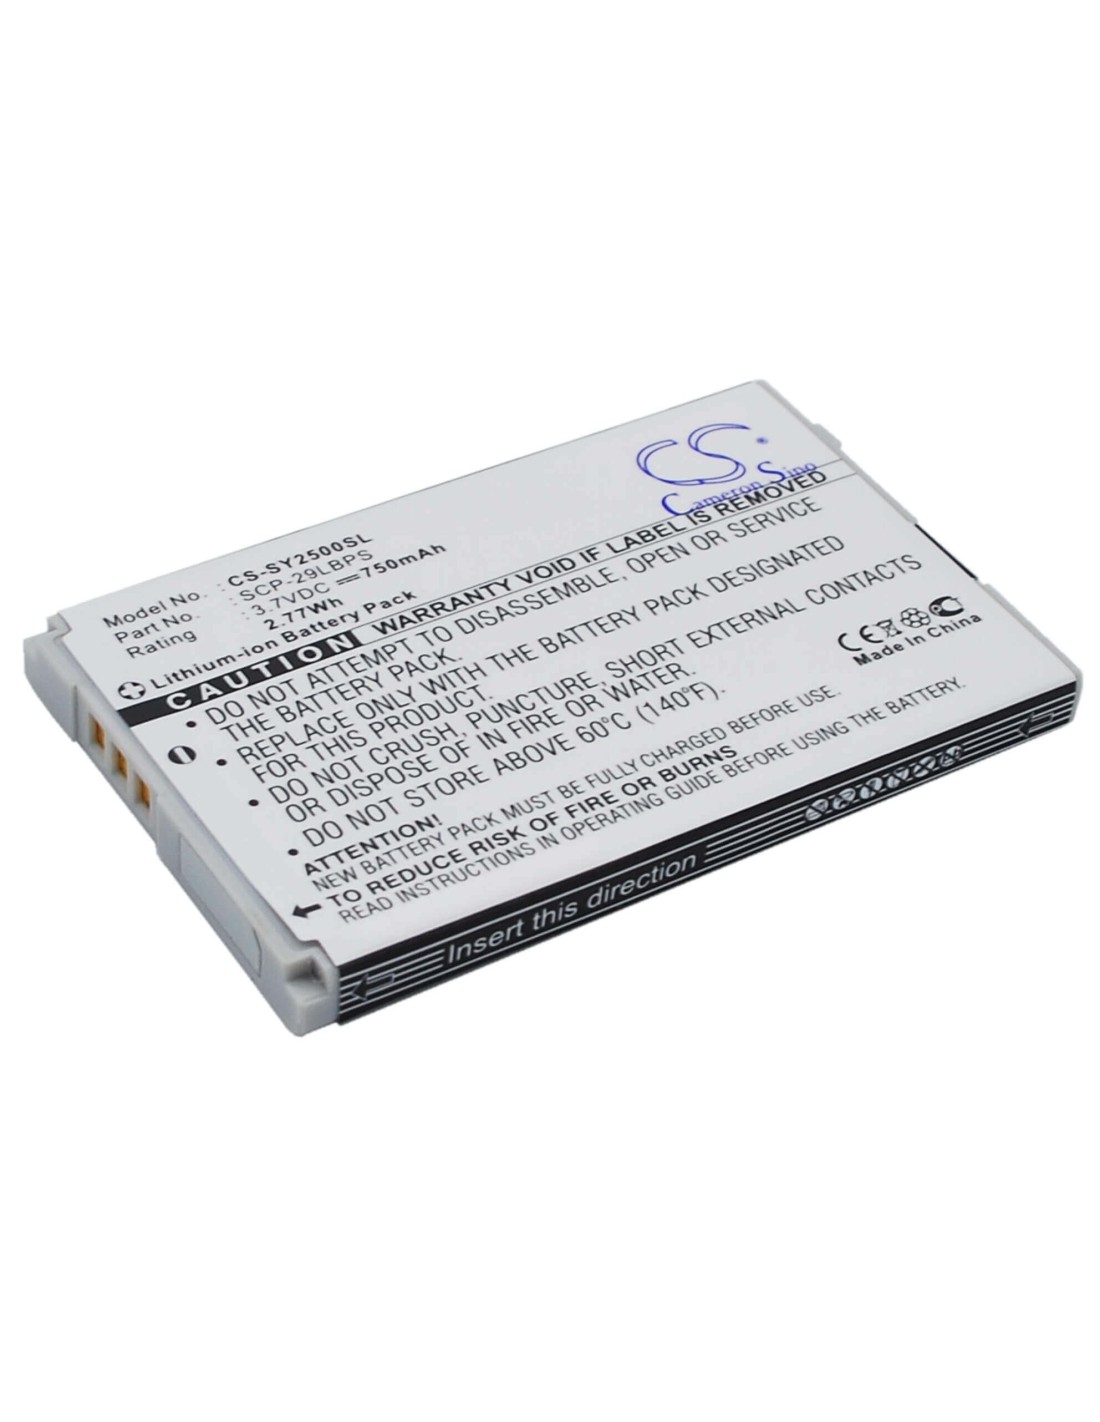 Battery for Sanyo SCP-2500, S1 3.7V, 750mAh - 2.78Wh